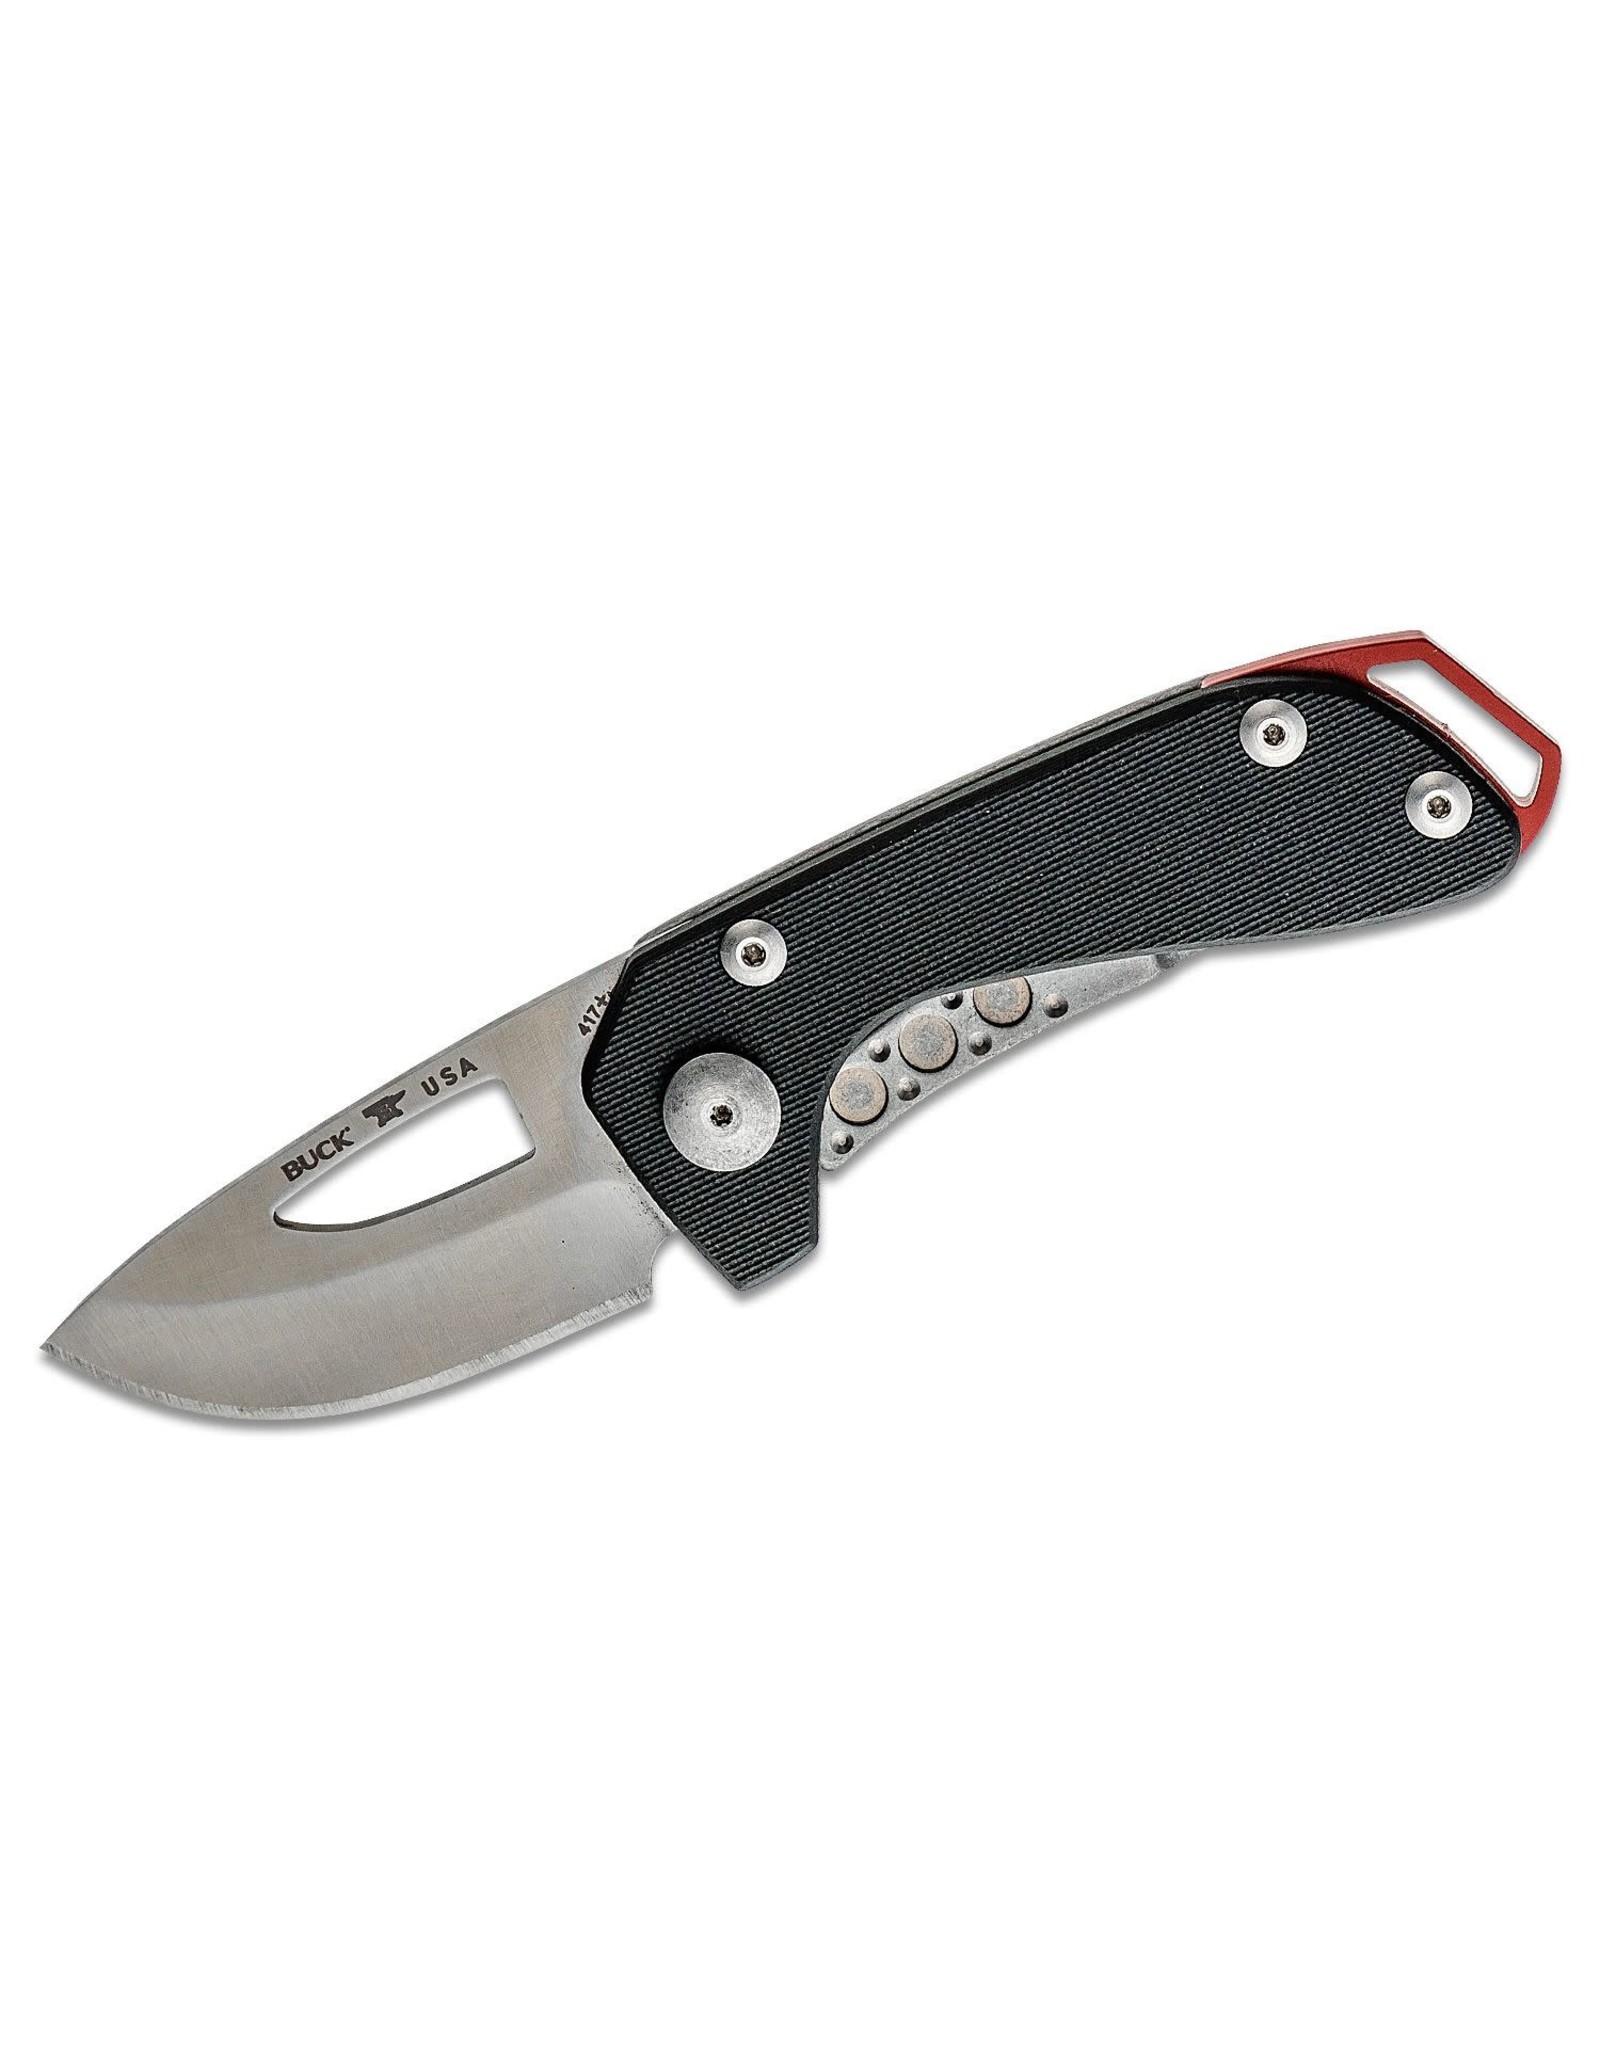 Buck Knives Buck 417 Budgie Compact Folding Knife 2" S35VN Drop Point Plain Blade, Black G10 and Stainless Steel Handles